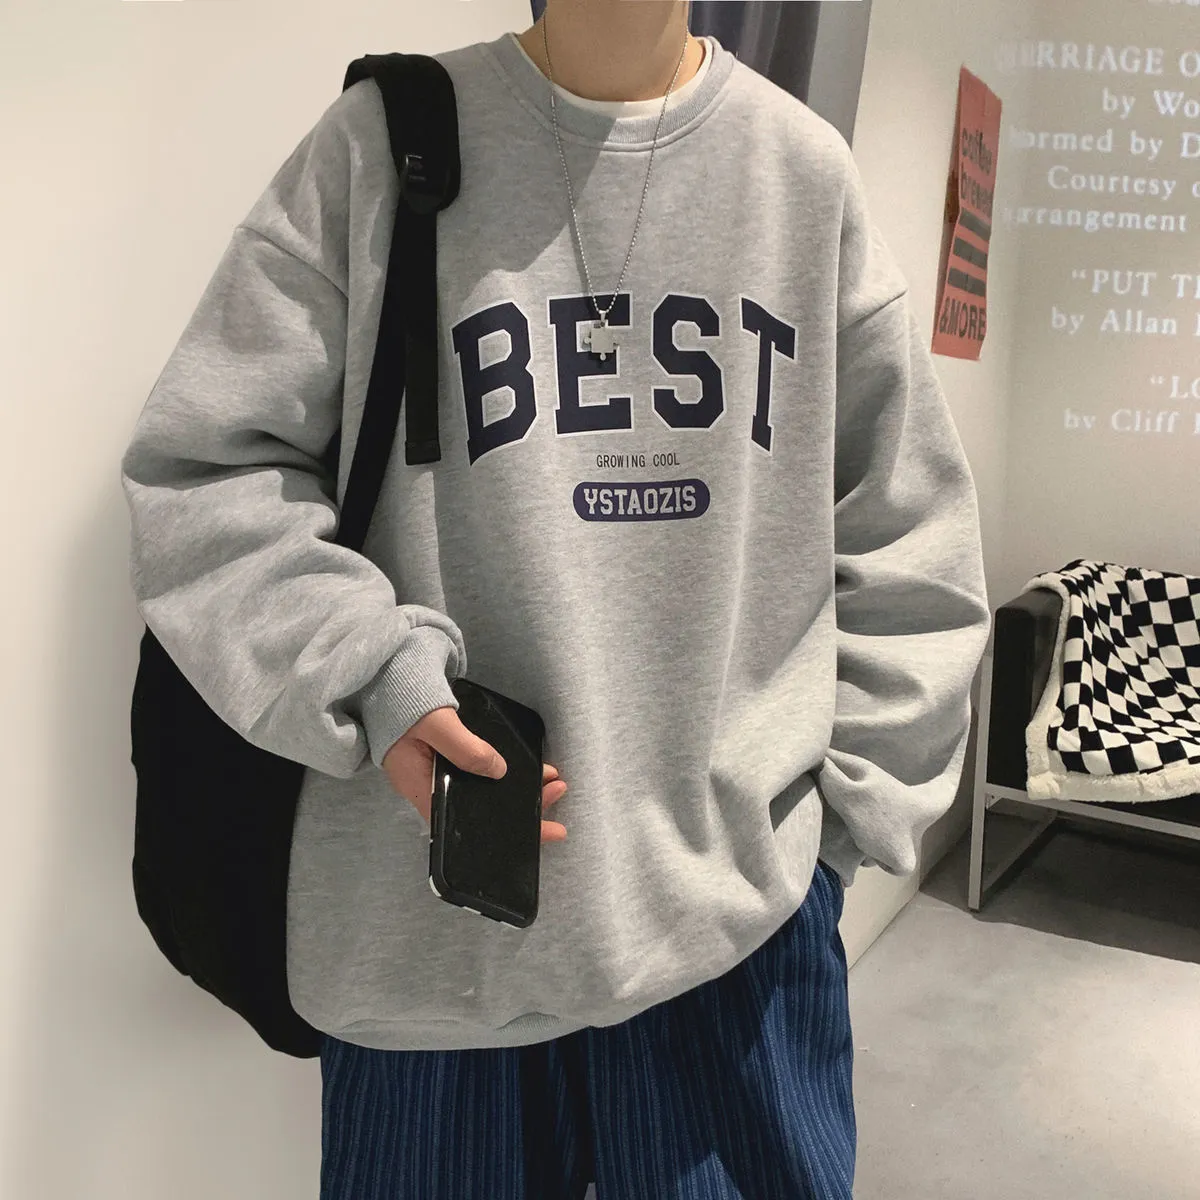 Mens Hoodies Sweatshirts Privathinker Spring Autumn Letter Hoodies For Men Oversized Sweatshirts Korean Man Clothing Casual Unisex Pullovers Thick 3XL 230224